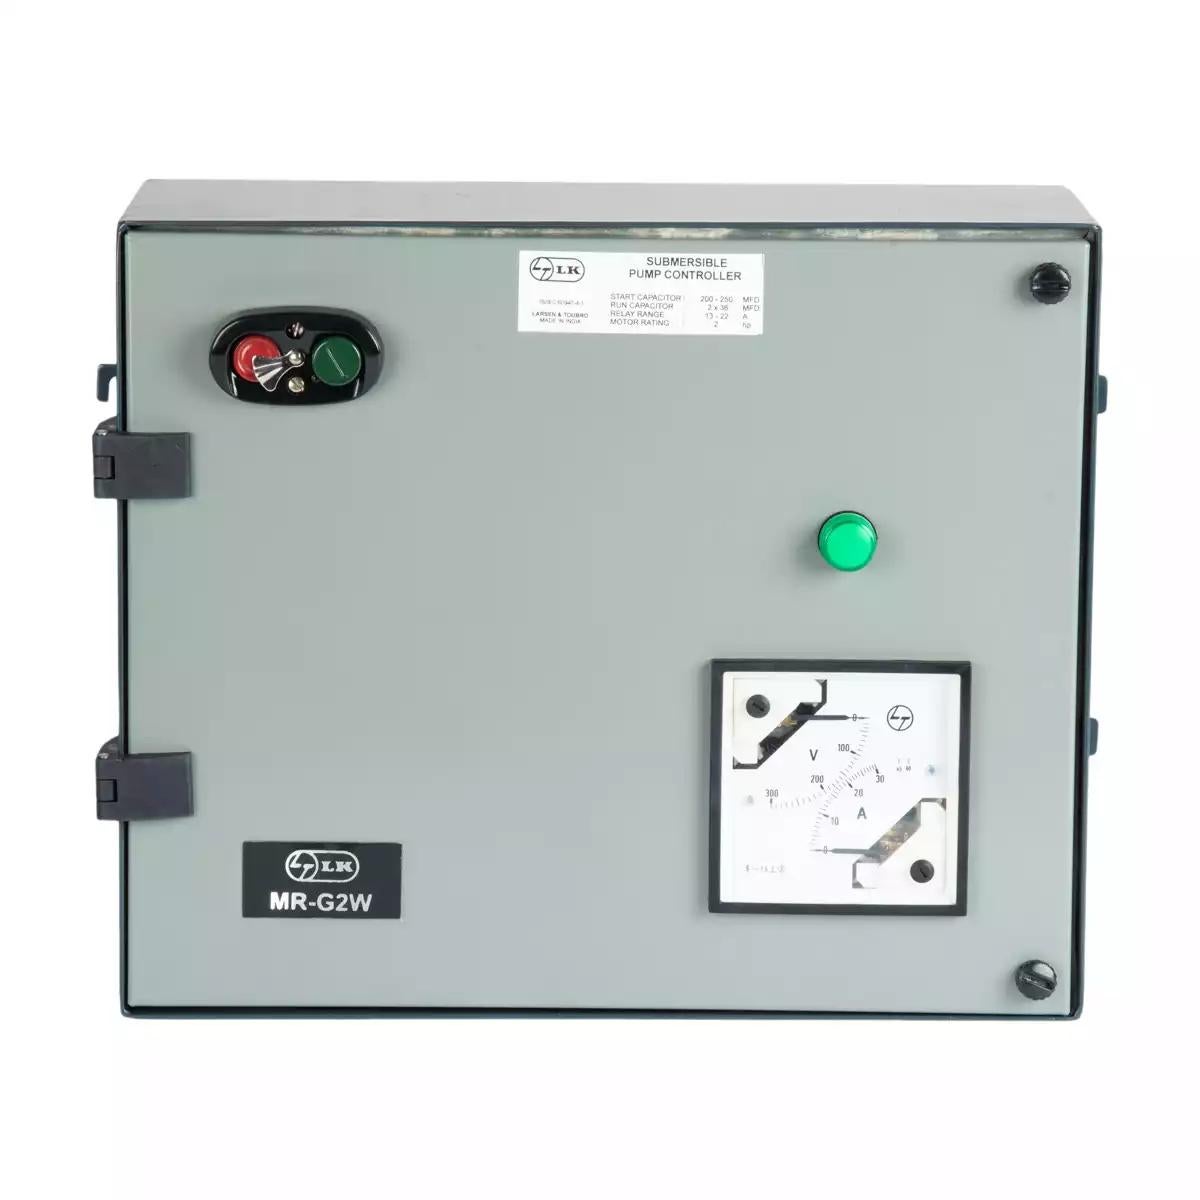 Single Phase Controller with WLC for Submersible Pump Application,MR-G2W,2HP,200 / 250mfd,2 x 36mfd (CS91043BEDF)